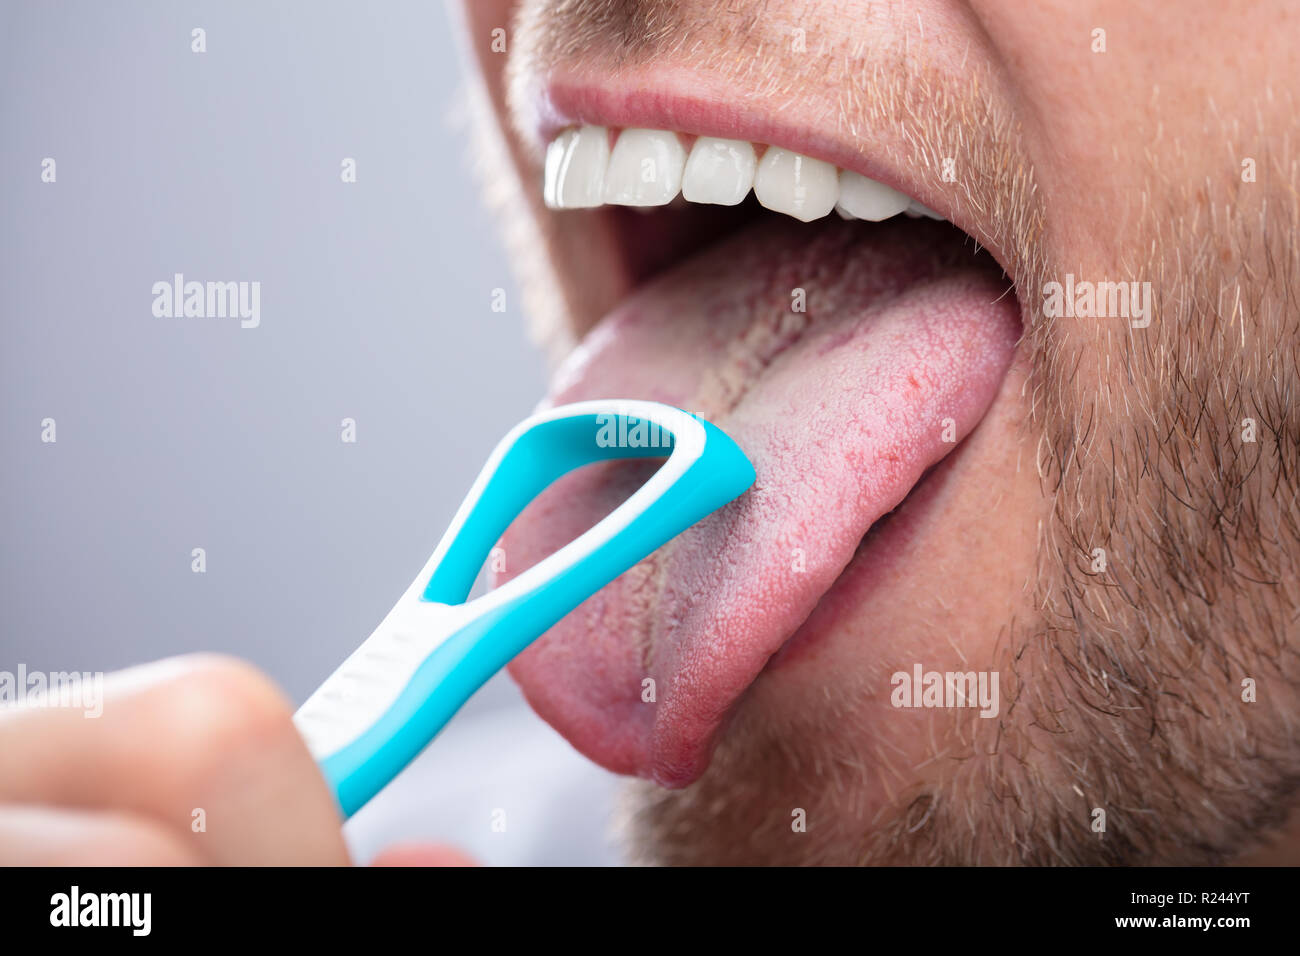 Close-up Of A Man Cleaning His Tongue With Cleaner Stock Photo